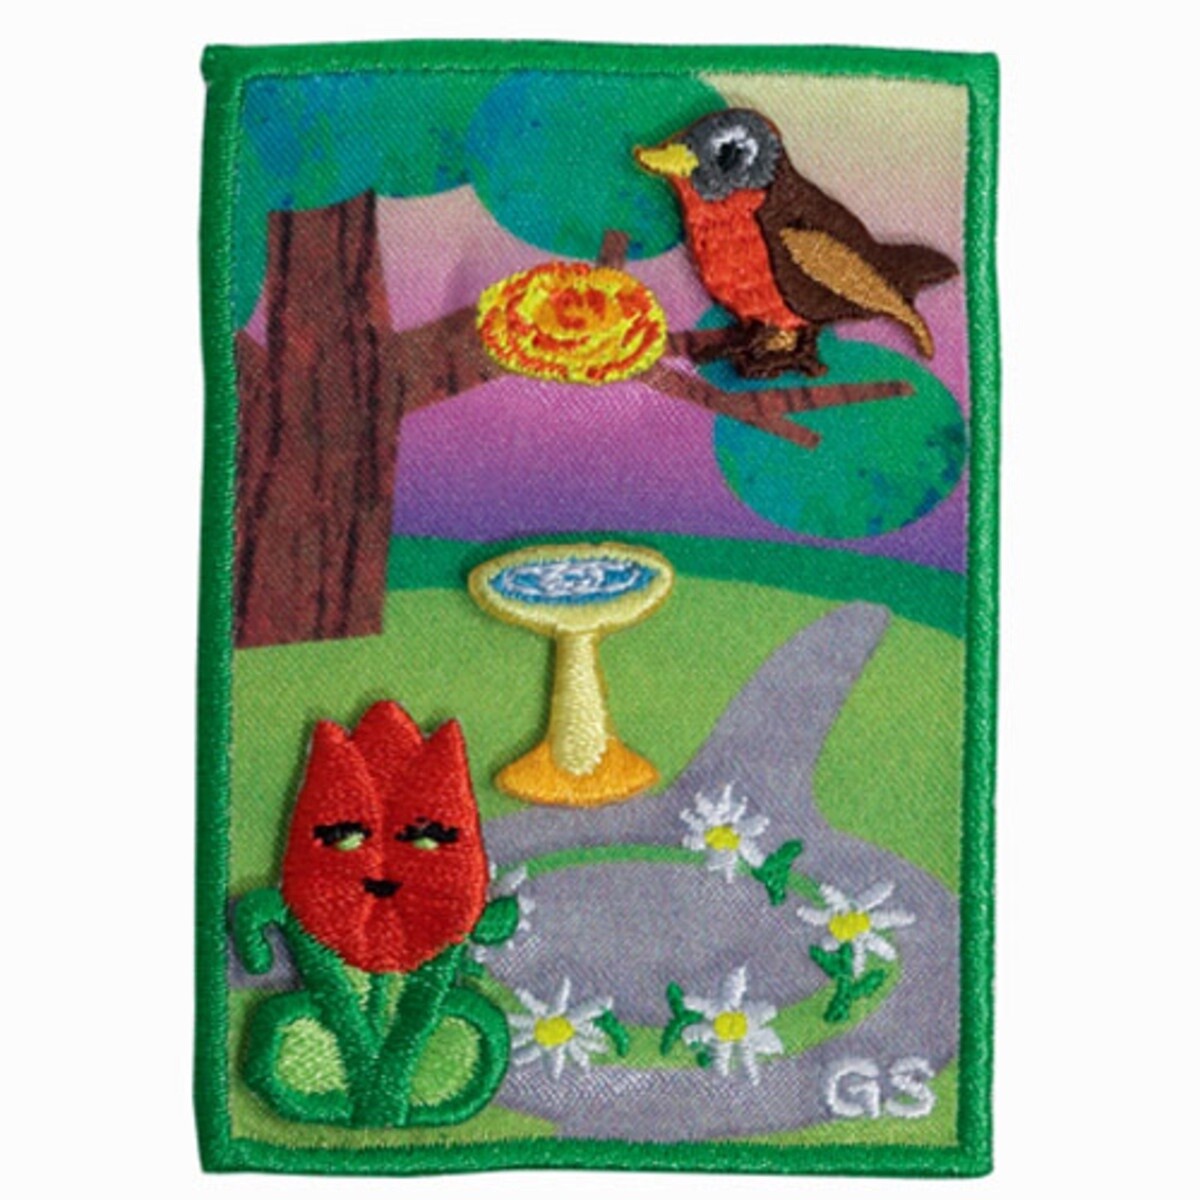 5 Flowers, 4 Stories, 3 Cheers For Animals! Daisy Journey Award Set